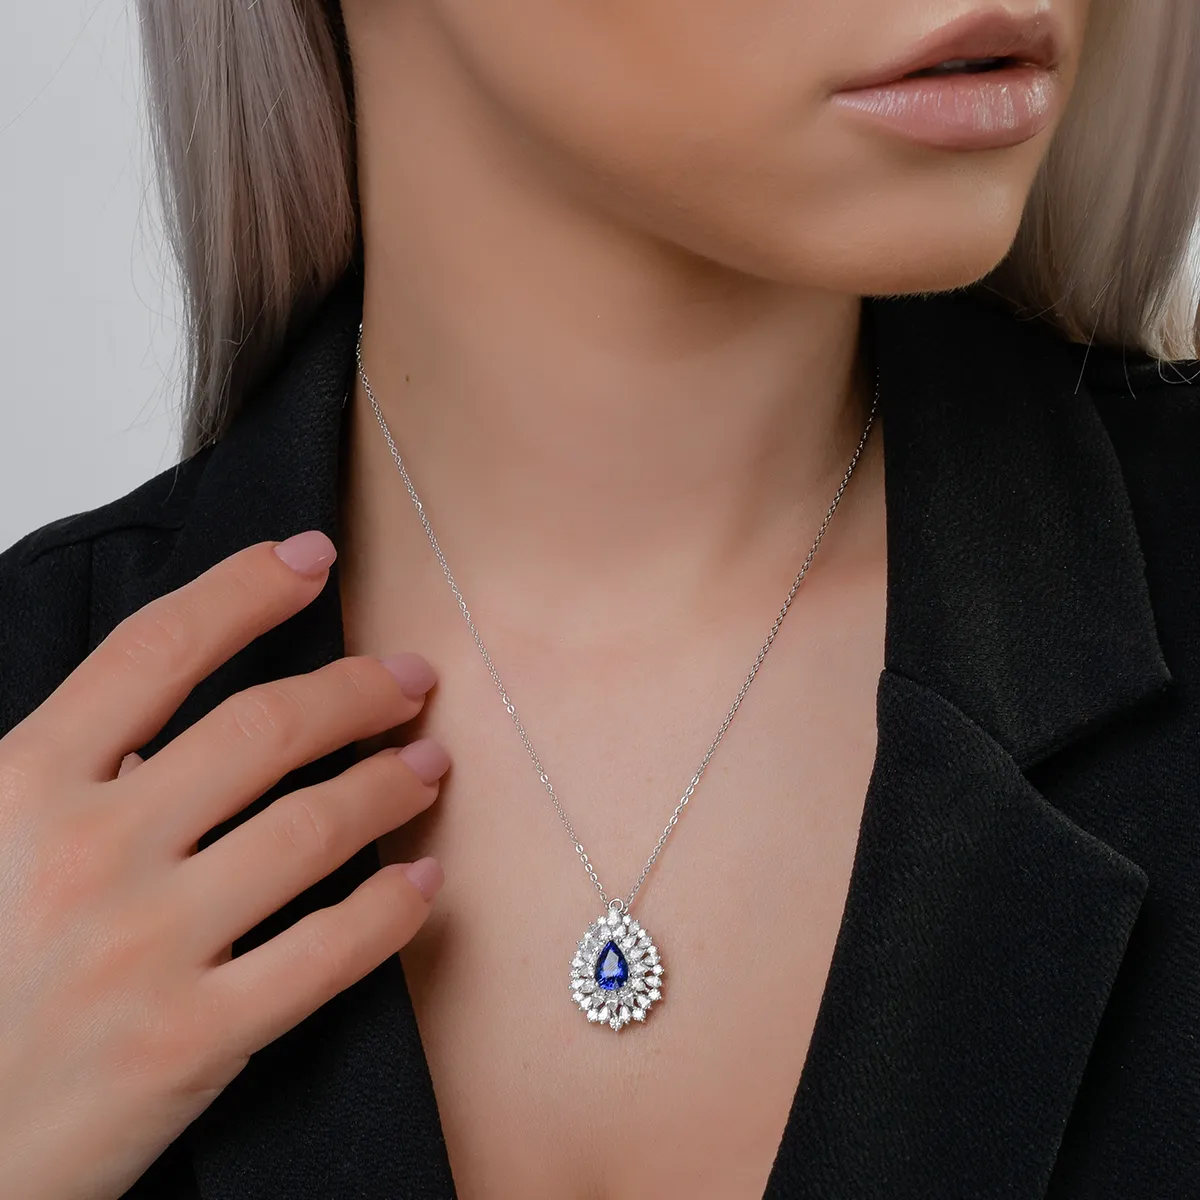 18K white gold pendant with sapphire of 1.98ct and diamonds of 1.9ct